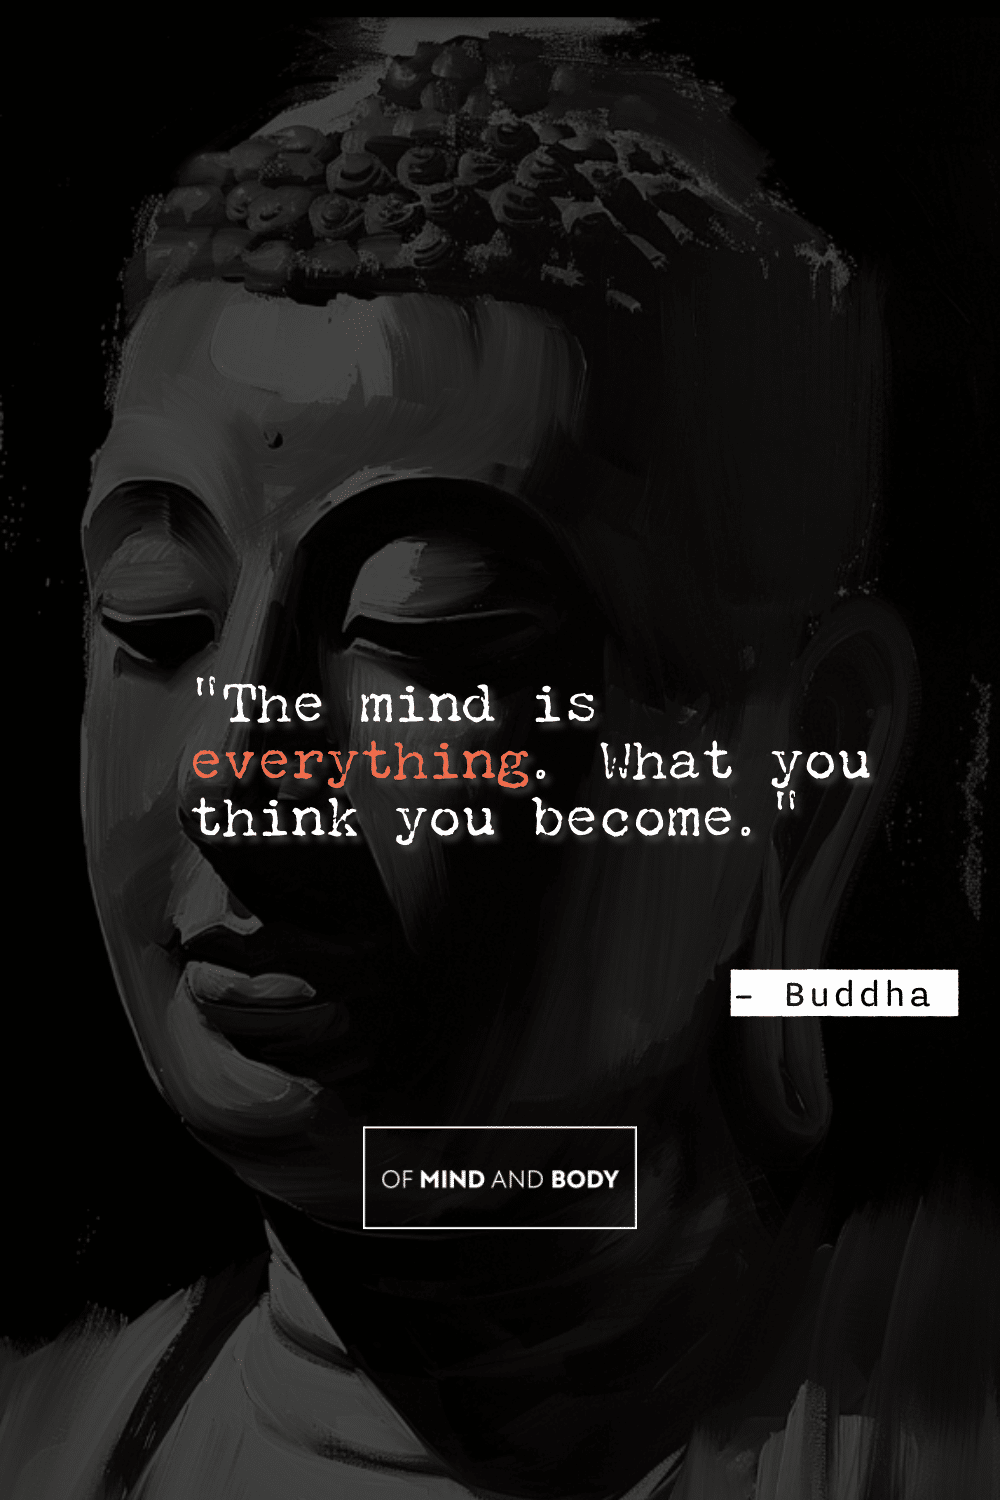 Quotes on Self Improvement - "The mind is everything. What you think you become."